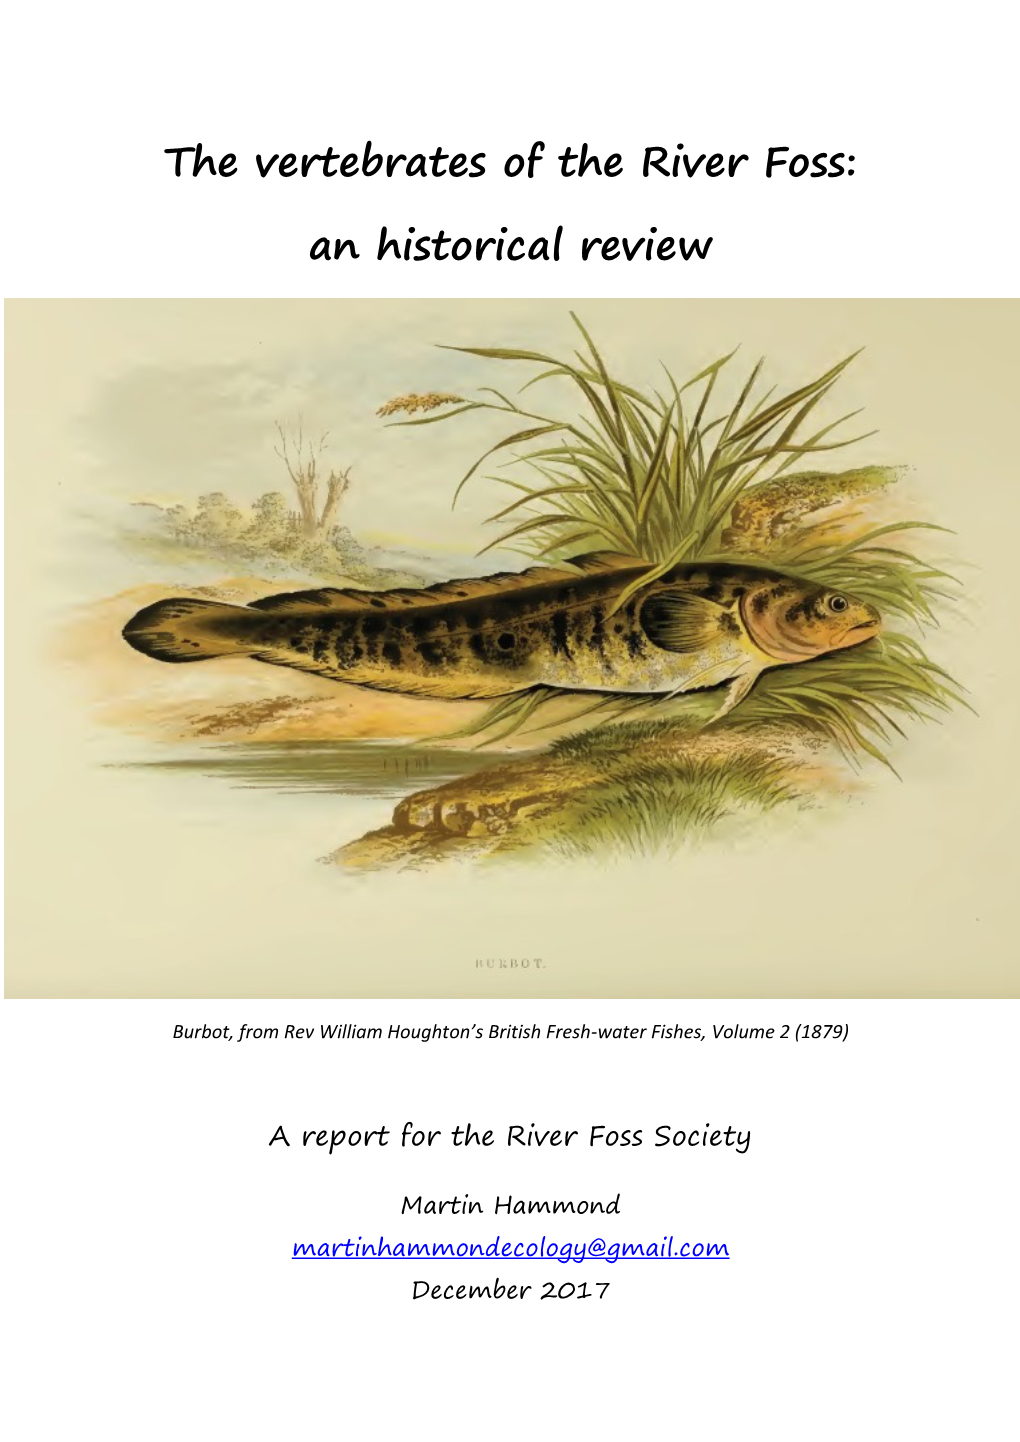 The Vertebrates of the River Foss: an Historical